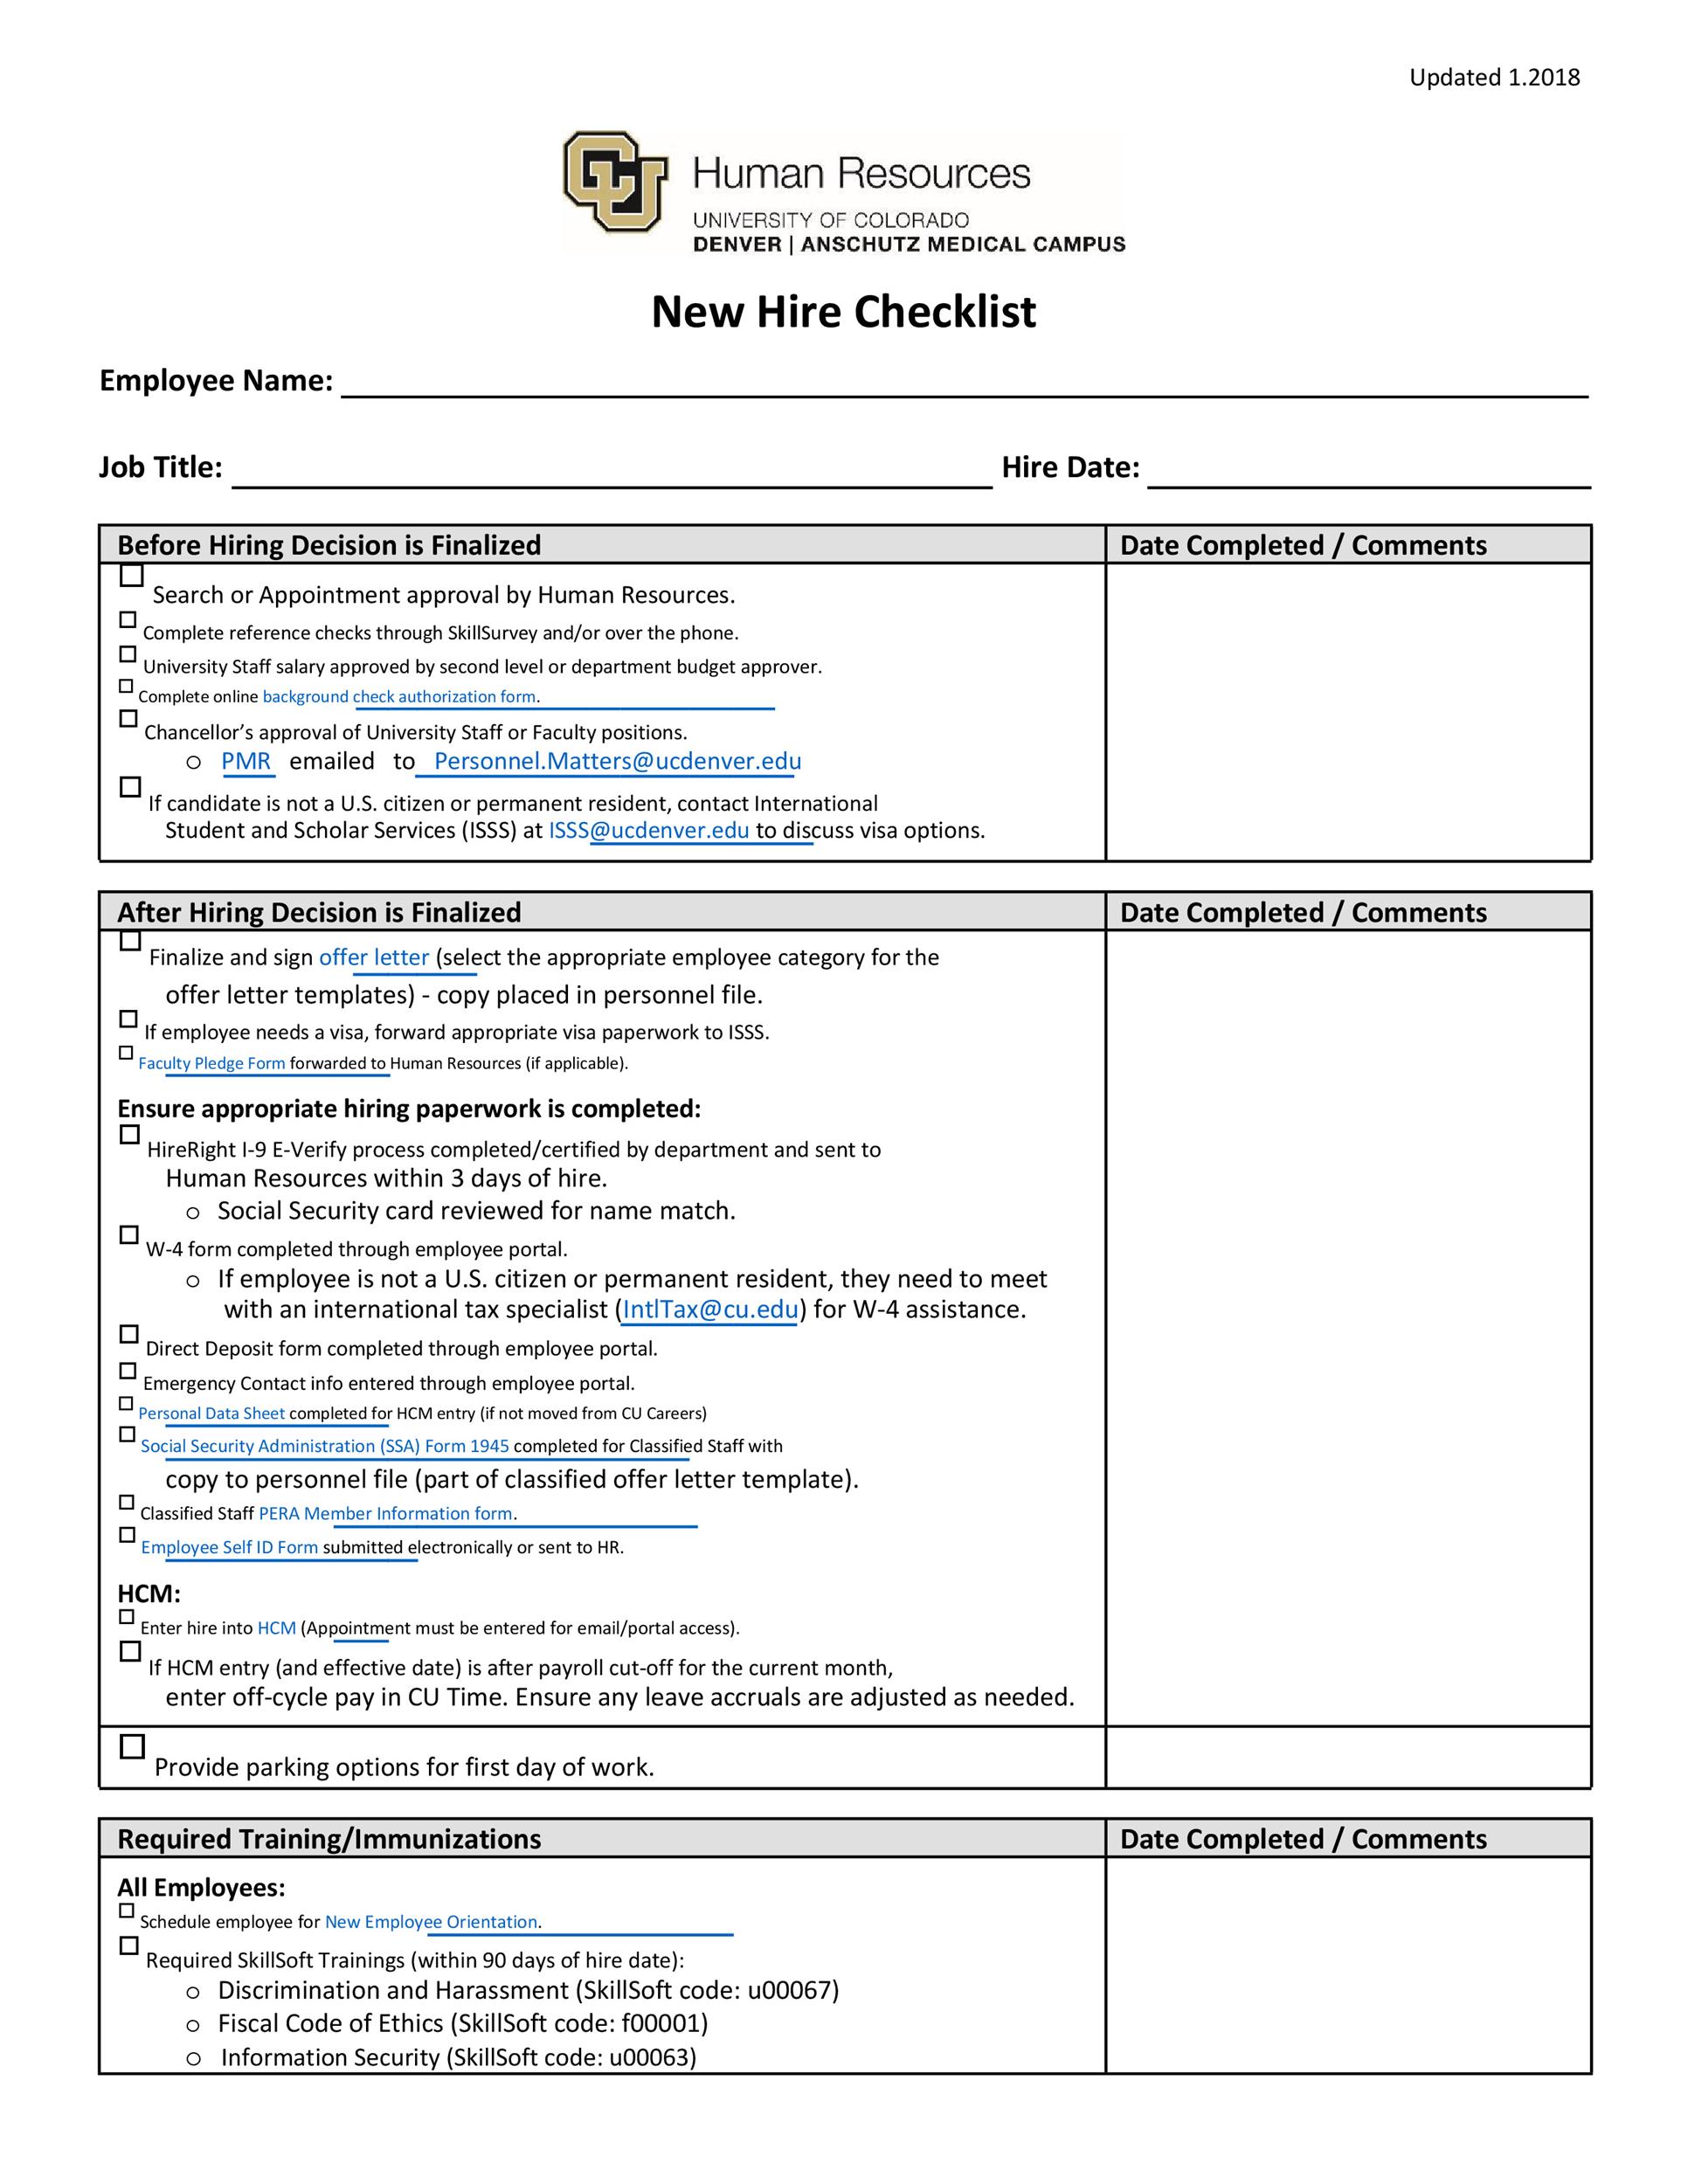 New Employee Onboarding Checklist Template Excel Tutore